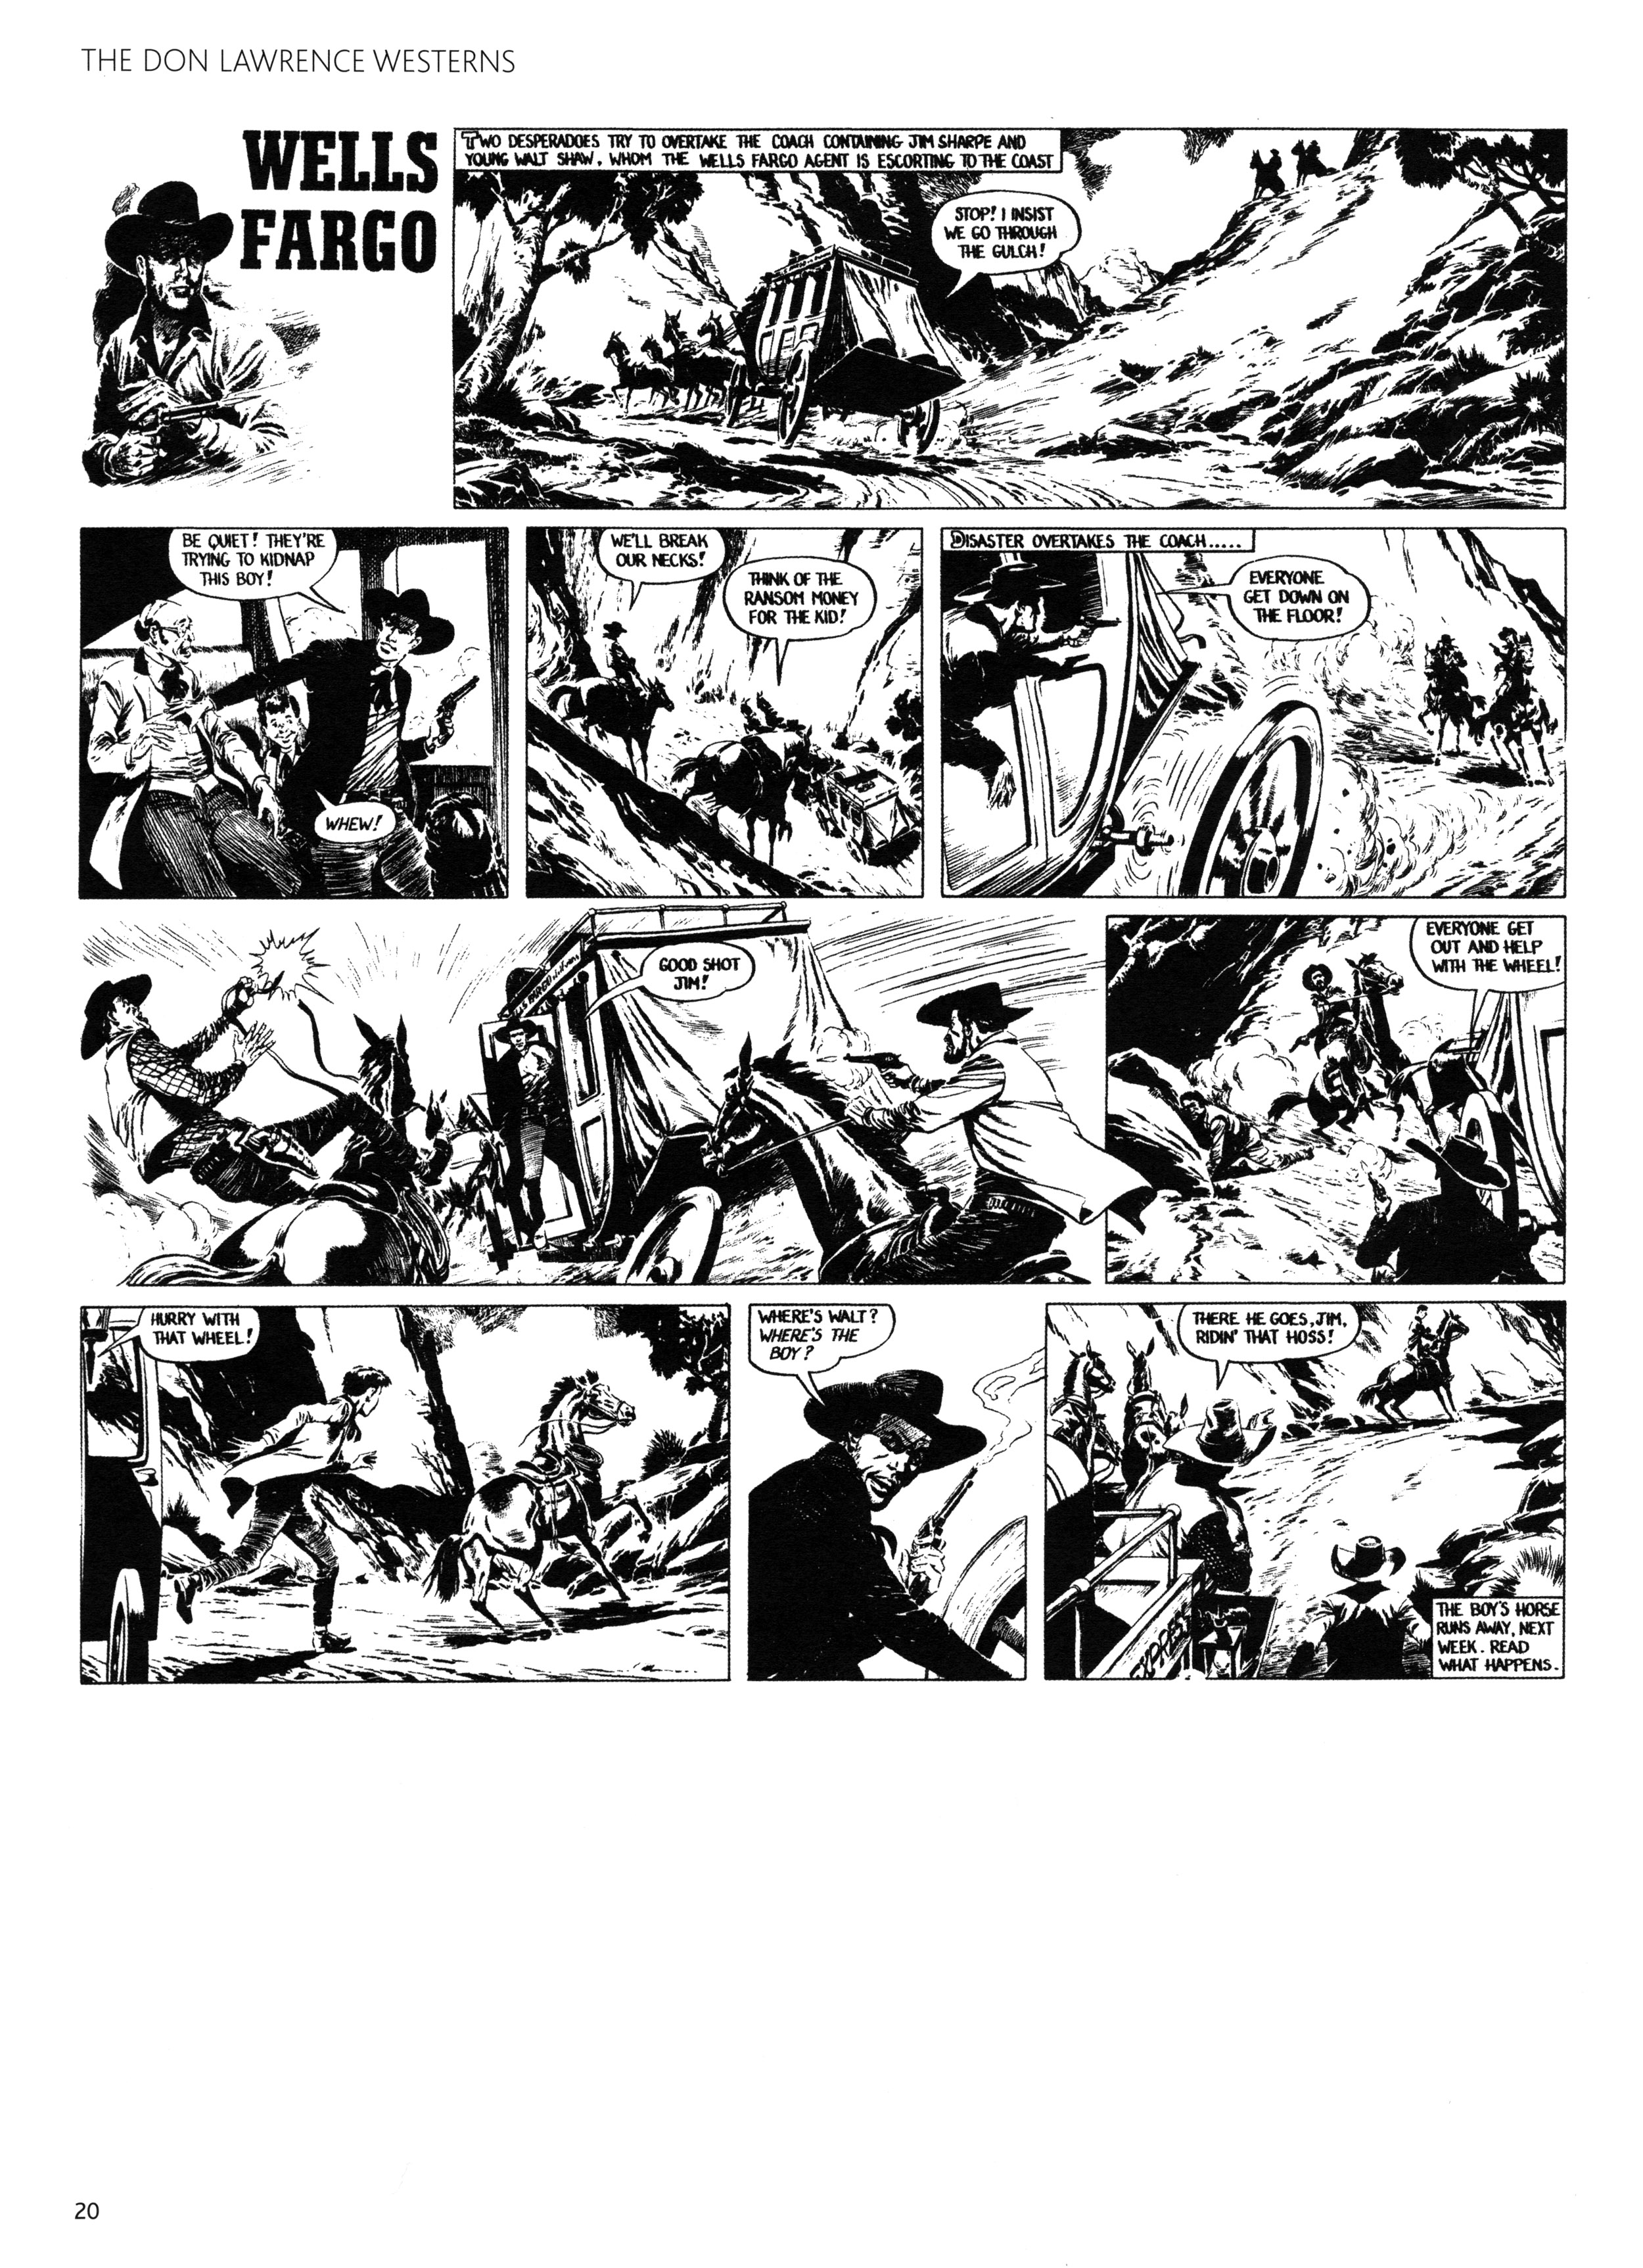 Read online Don Lawrence Westerns comic -  Issue # TPB (Part 1) - 24